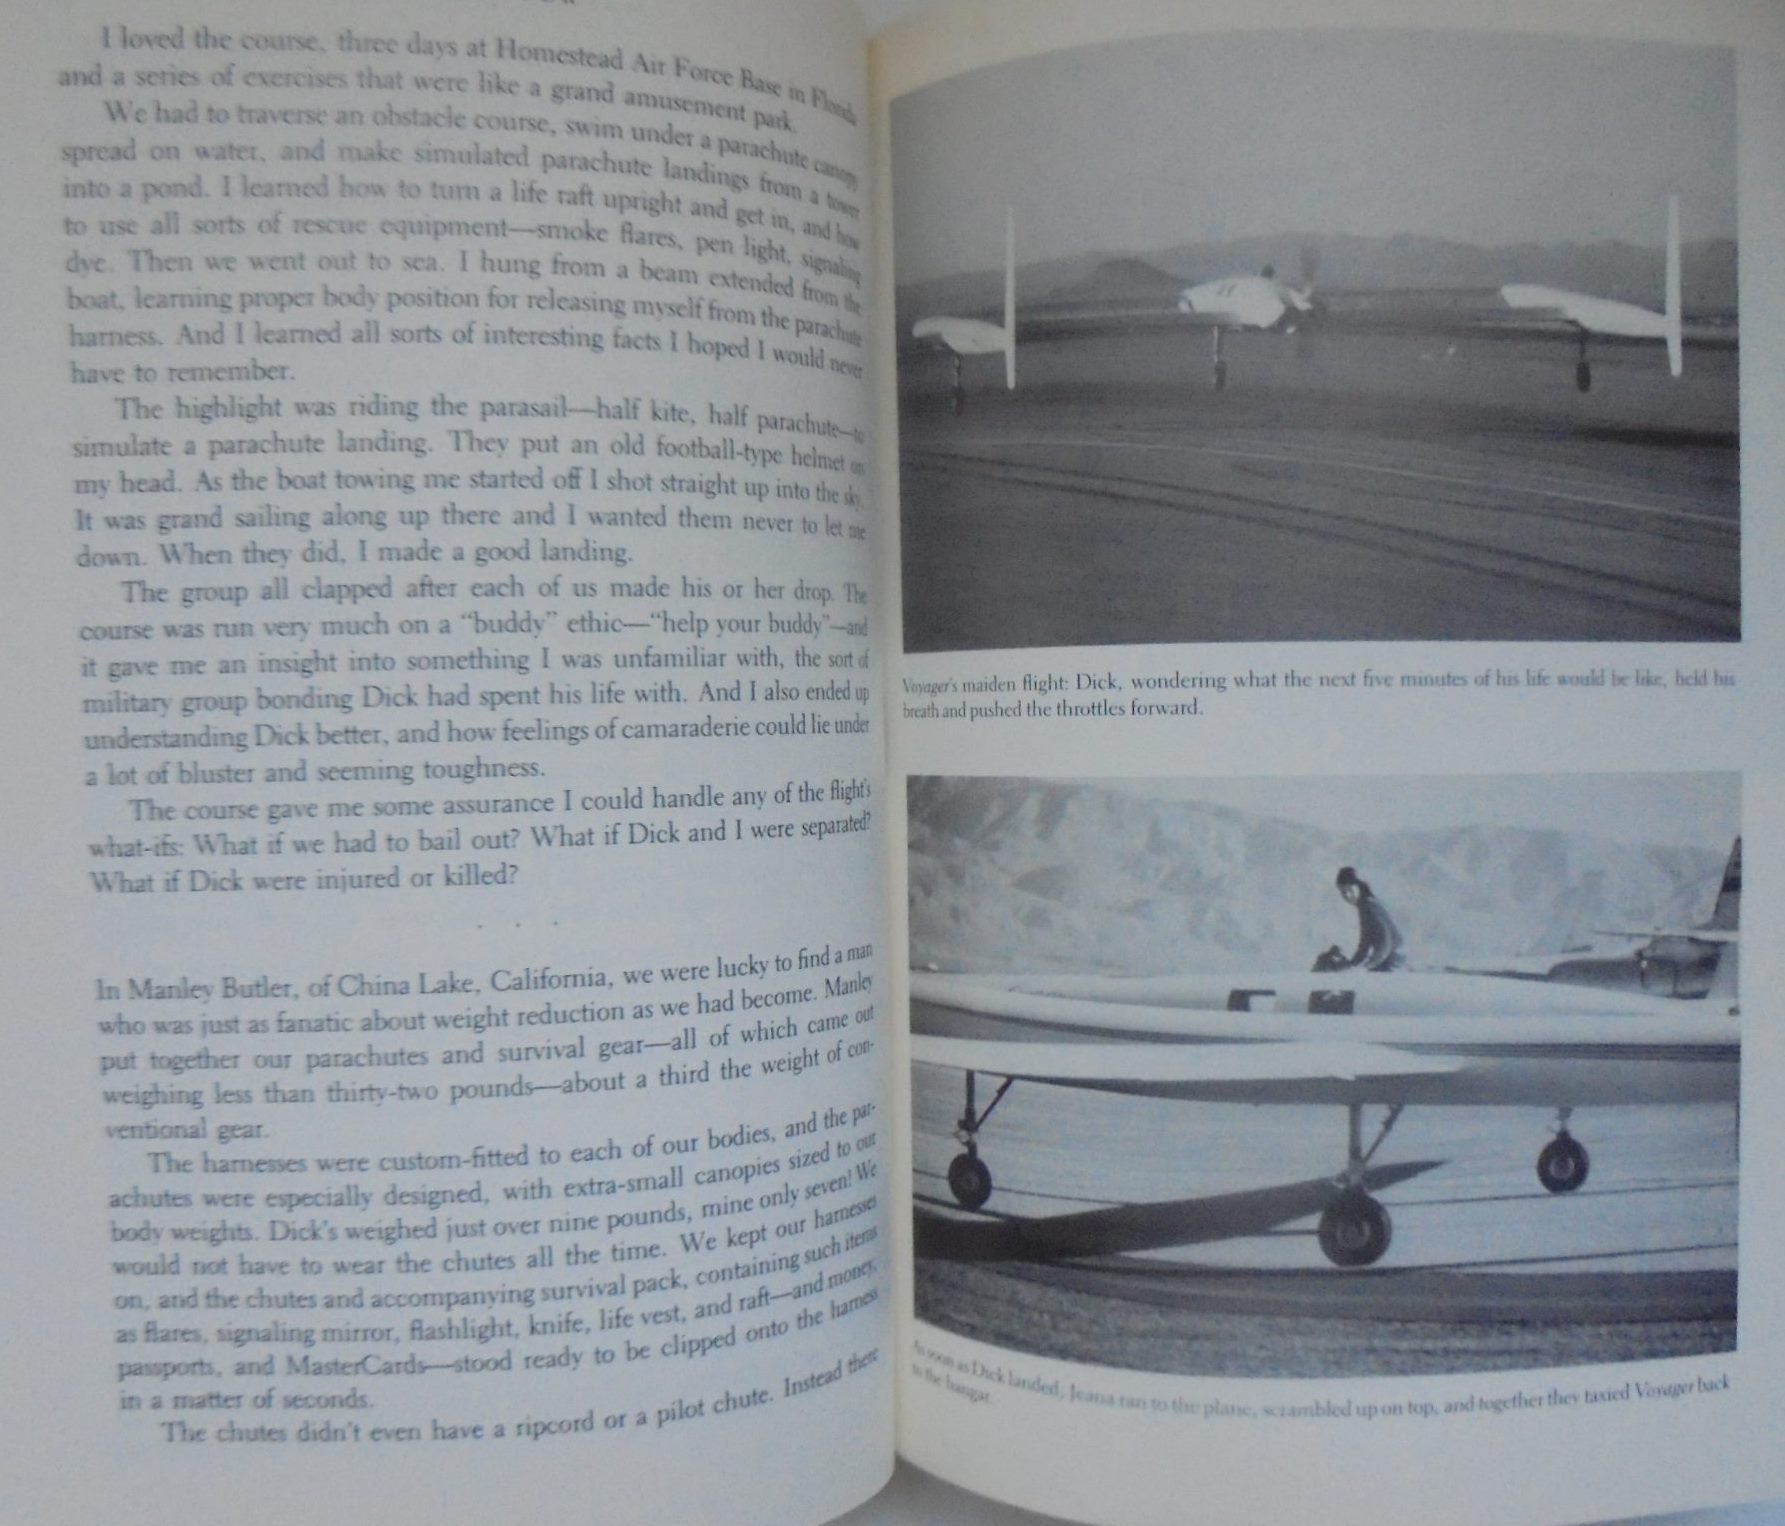 'VOYAGER: THE FLYING ADVENTURE OF A LIFETIME. by Jeana Yeager, Dick Rutan and Phil Patton. Hardback 1st edition.